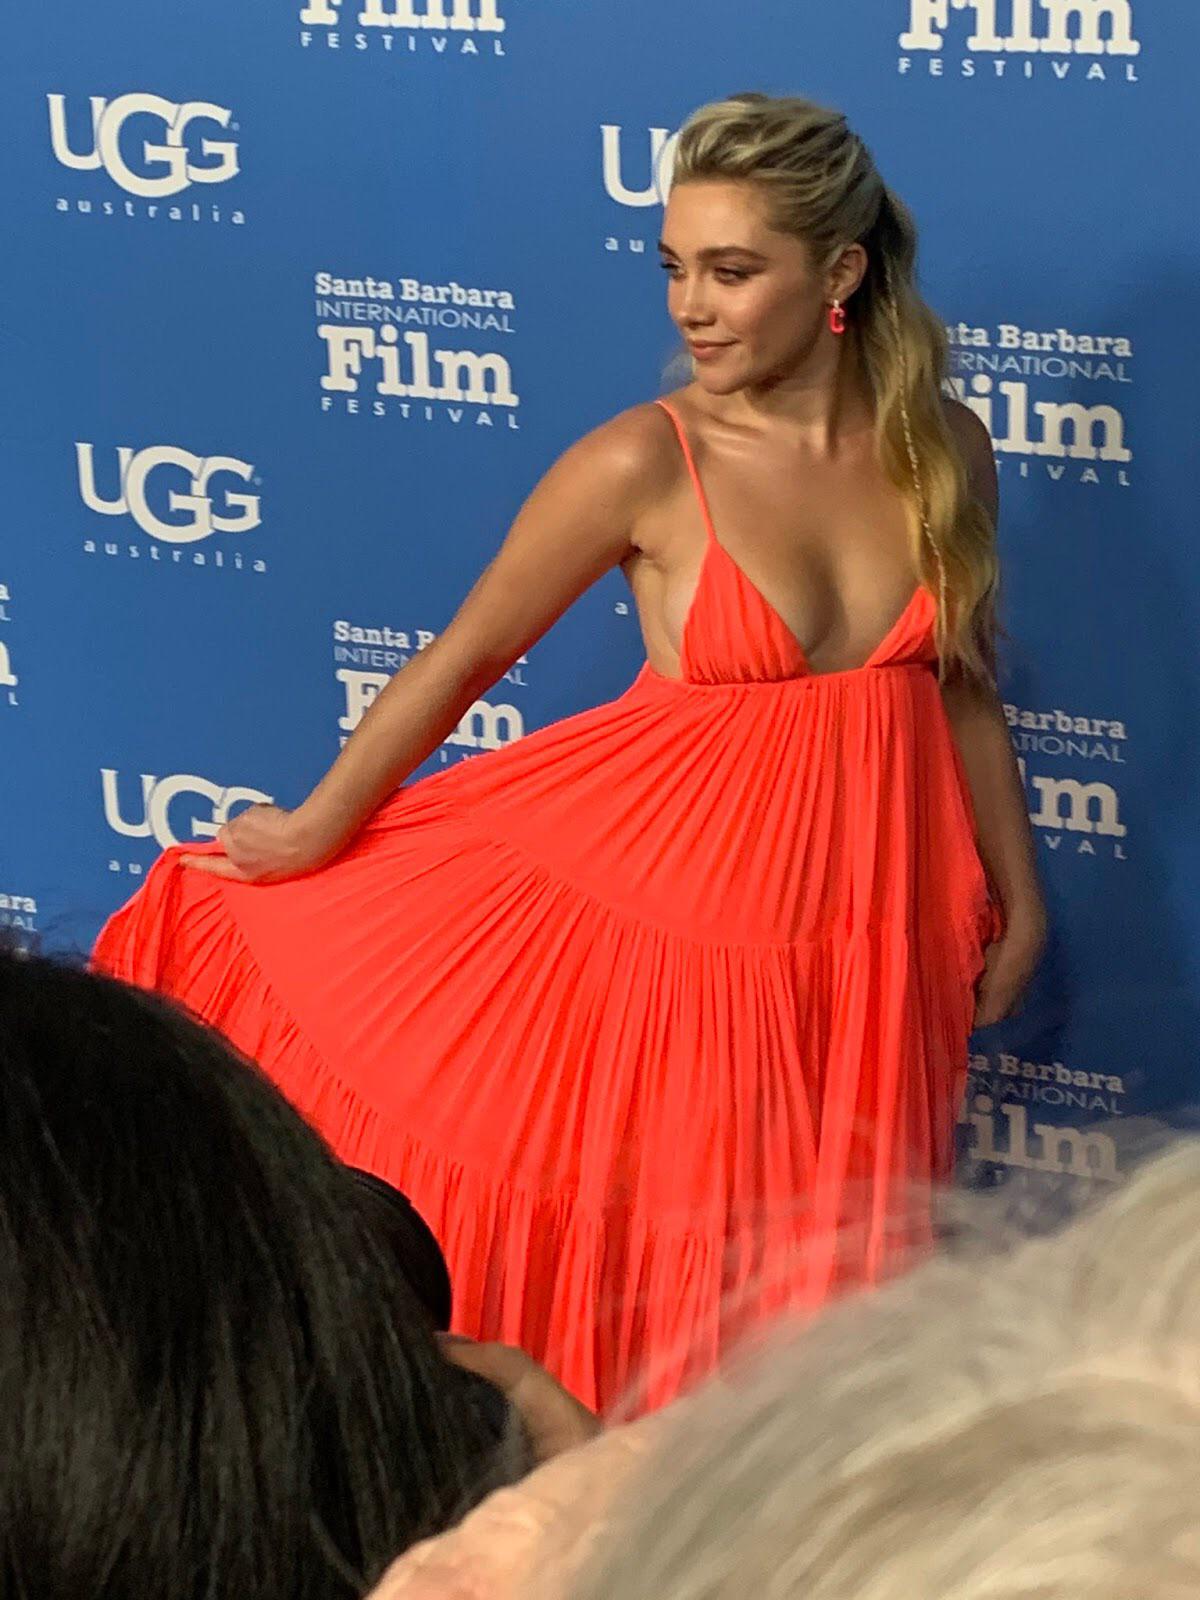 Florence Pugh gives me some wild thoughts